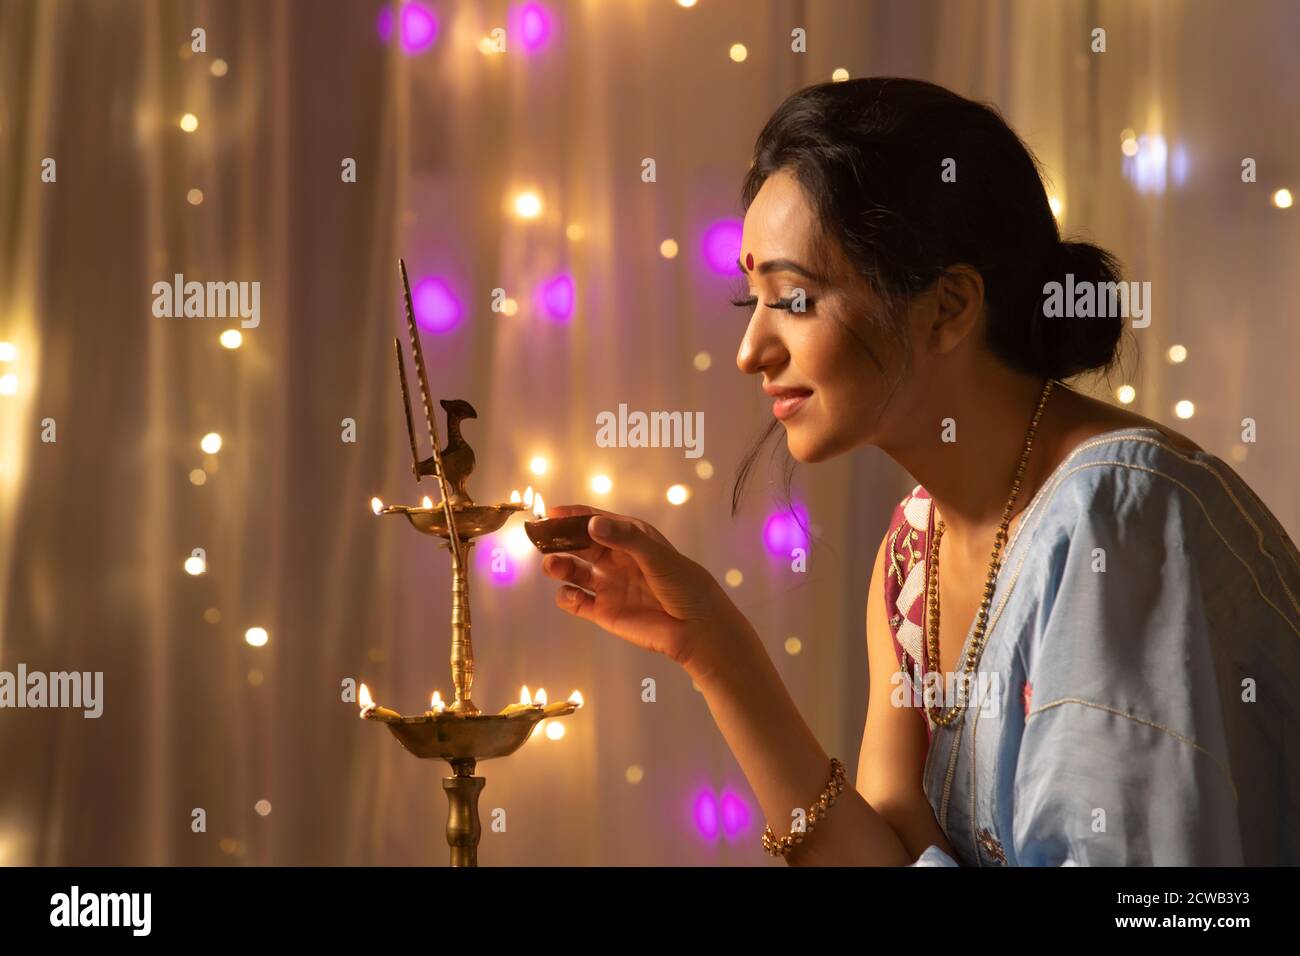 Woman lighting a lamp with diya on the occasion of Diwali Stock Photo